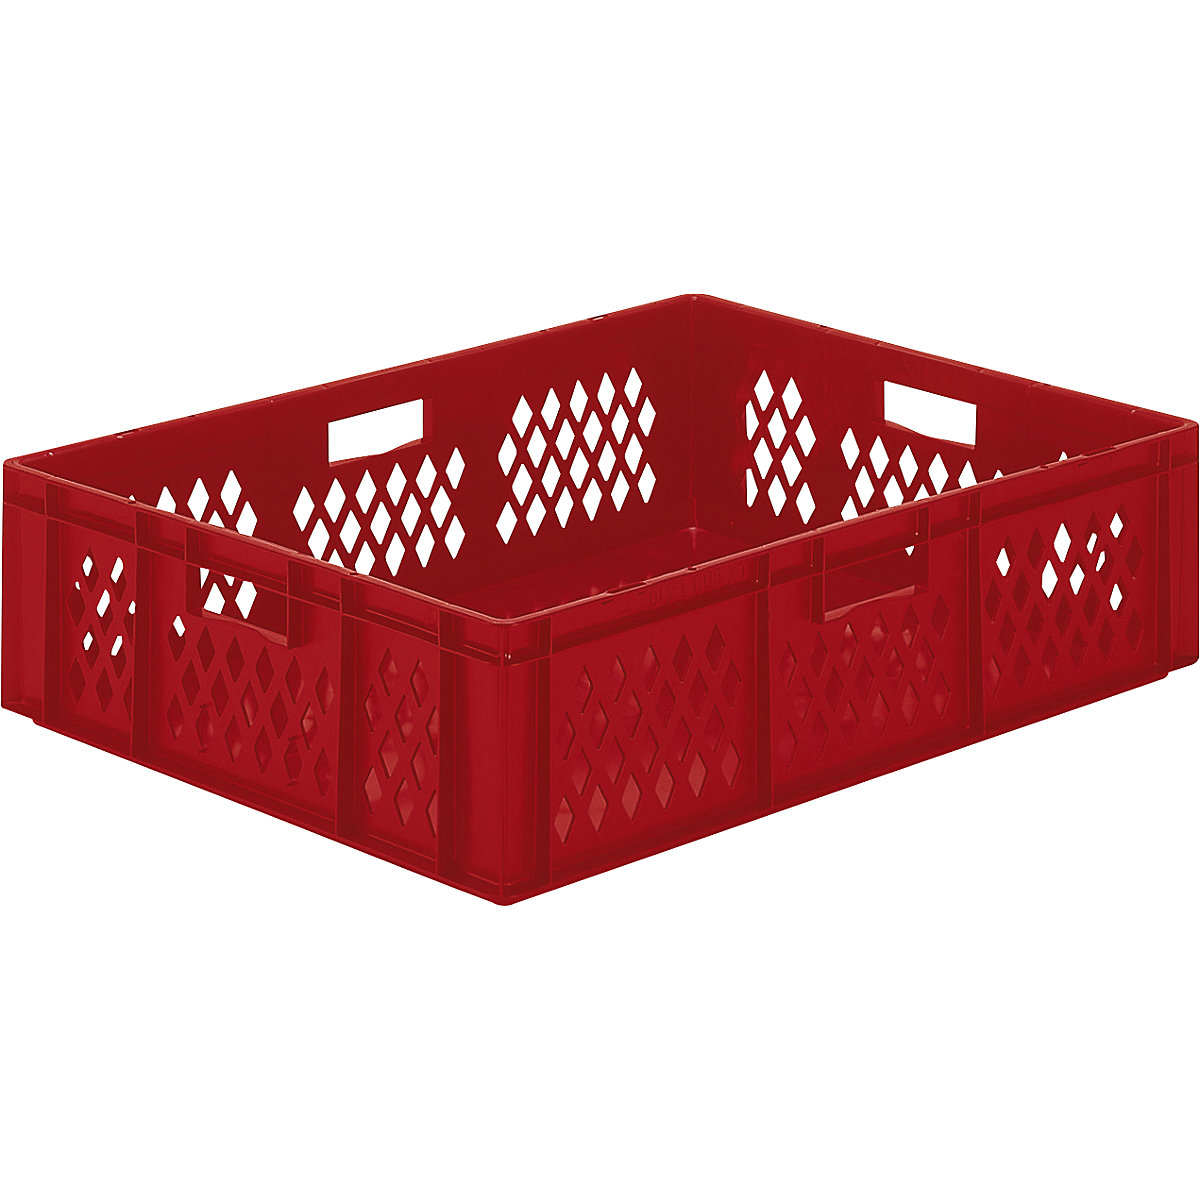 Euro stacking container, perforated walls, closed base, LxWxH 800 x 600 x 210 mm, red, pack of 2-6